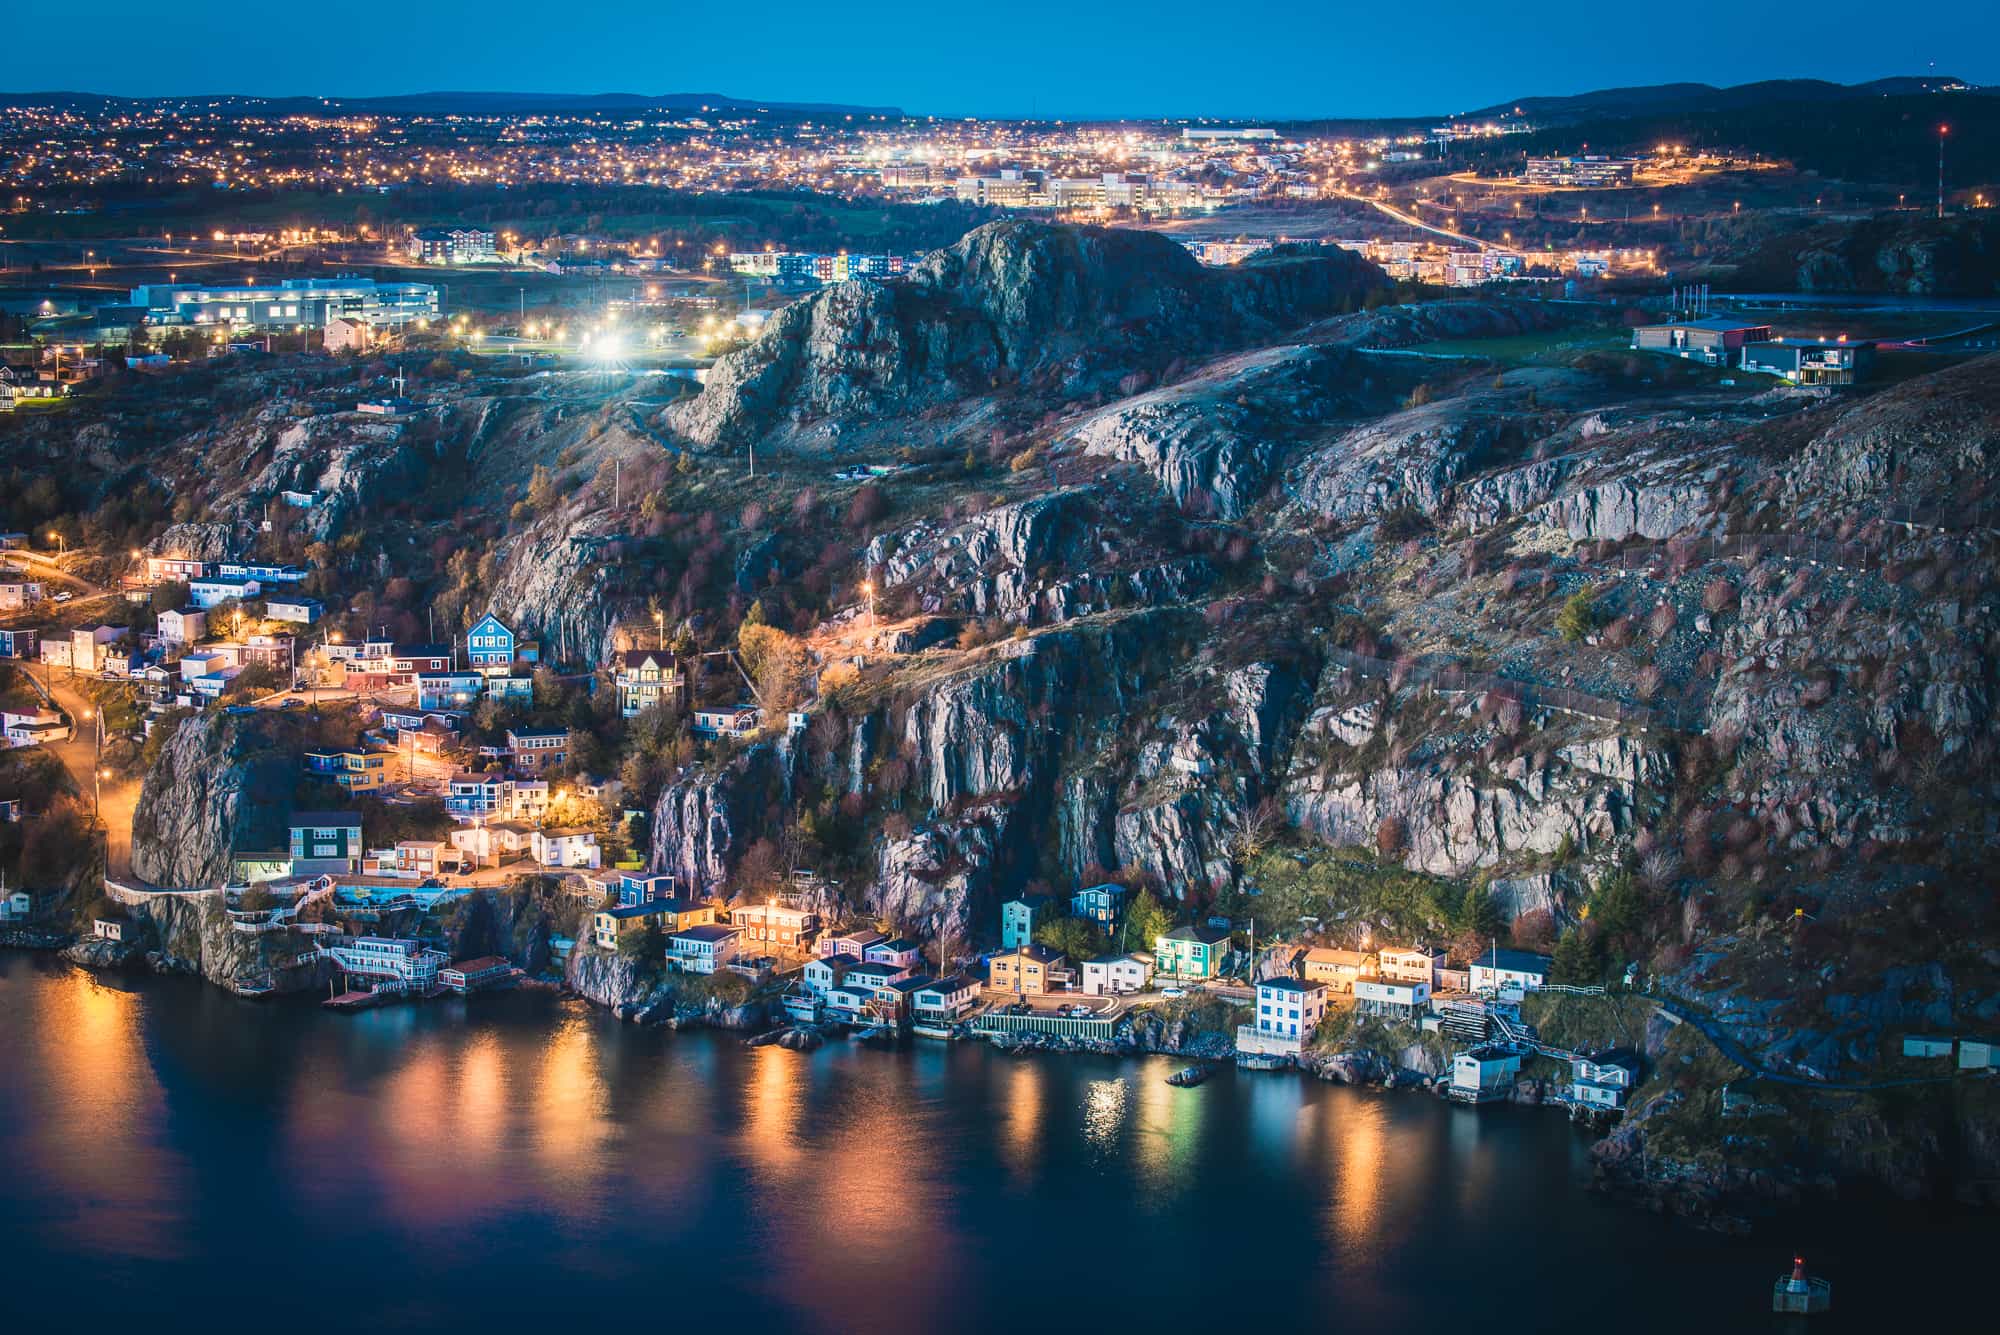 A new angle on a familiar face. The Outer Battery of St. John's from high above at twilight. One of my all time favorites. The Outer Battery might be one of the most colorful areas in all of St. John’s. The one road village at the bottom of a cliff was once a former fishing community and it still shows, as old fishing stages still line the harbors edge. This picture of the Outer Battery area was one of those “almost never happened” photos and, despite the proximity to the city, one of the slightly riskier photos I’ve hiked to shoot. Being surrounded by complete darkness atop the top of the Southside Hills is not fun. Trails that go off in every direction and peril awaits with steep cliffs and drops a constant presence. Several times we discussed and assessed our risk and whether or not we should turn back. It sounds silly, the city is right there. But honestly it only takes one misstep to find yourself down an embankment. Though I had a headlamp we took care to comment on our reverse markers as we made our way off trail to where I needed to be to shoot this photo. All of this made for an easy but still dangerous exit off the hill because the trail down the hill is damp, slippery and rather steep in several sections. Definitely not something I’d have enjoyed doing alone.